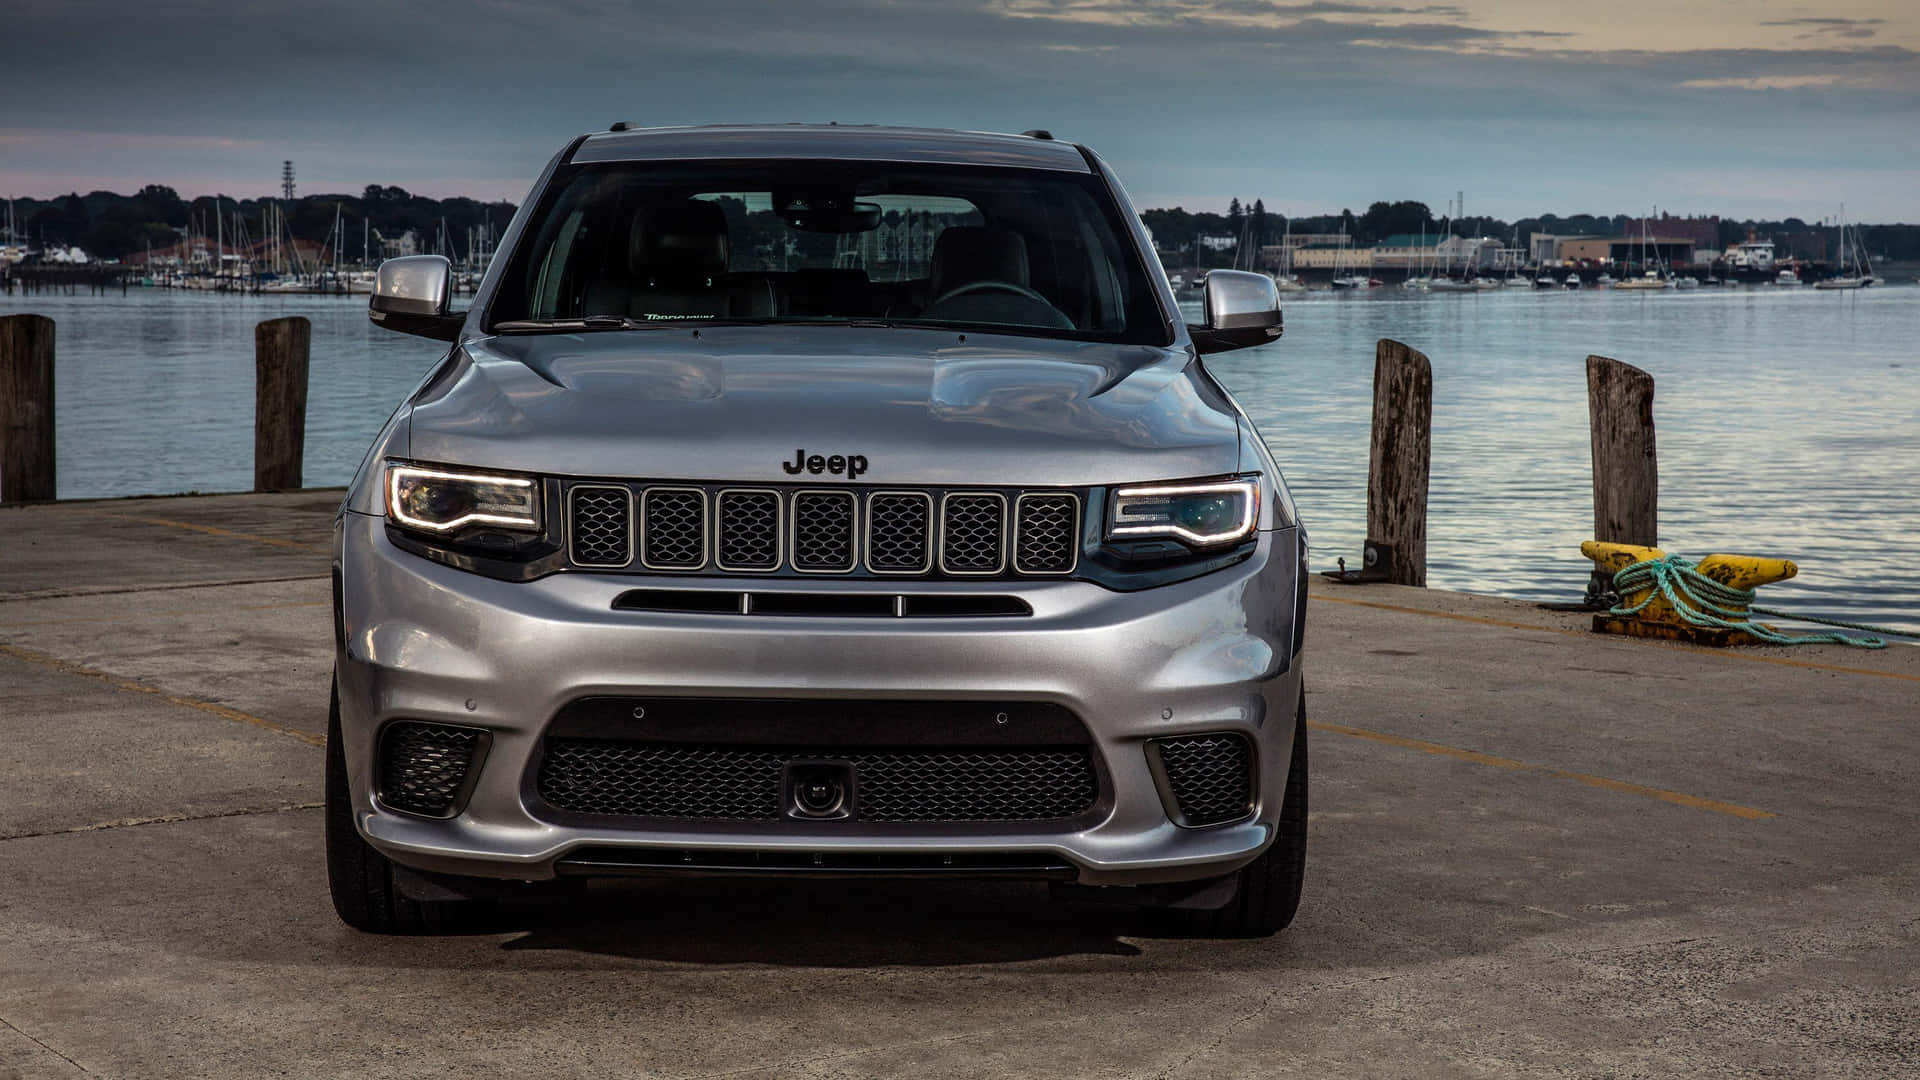 The Iconic Jeep Grand Cherokee In Its Natural Environment Wallpaper